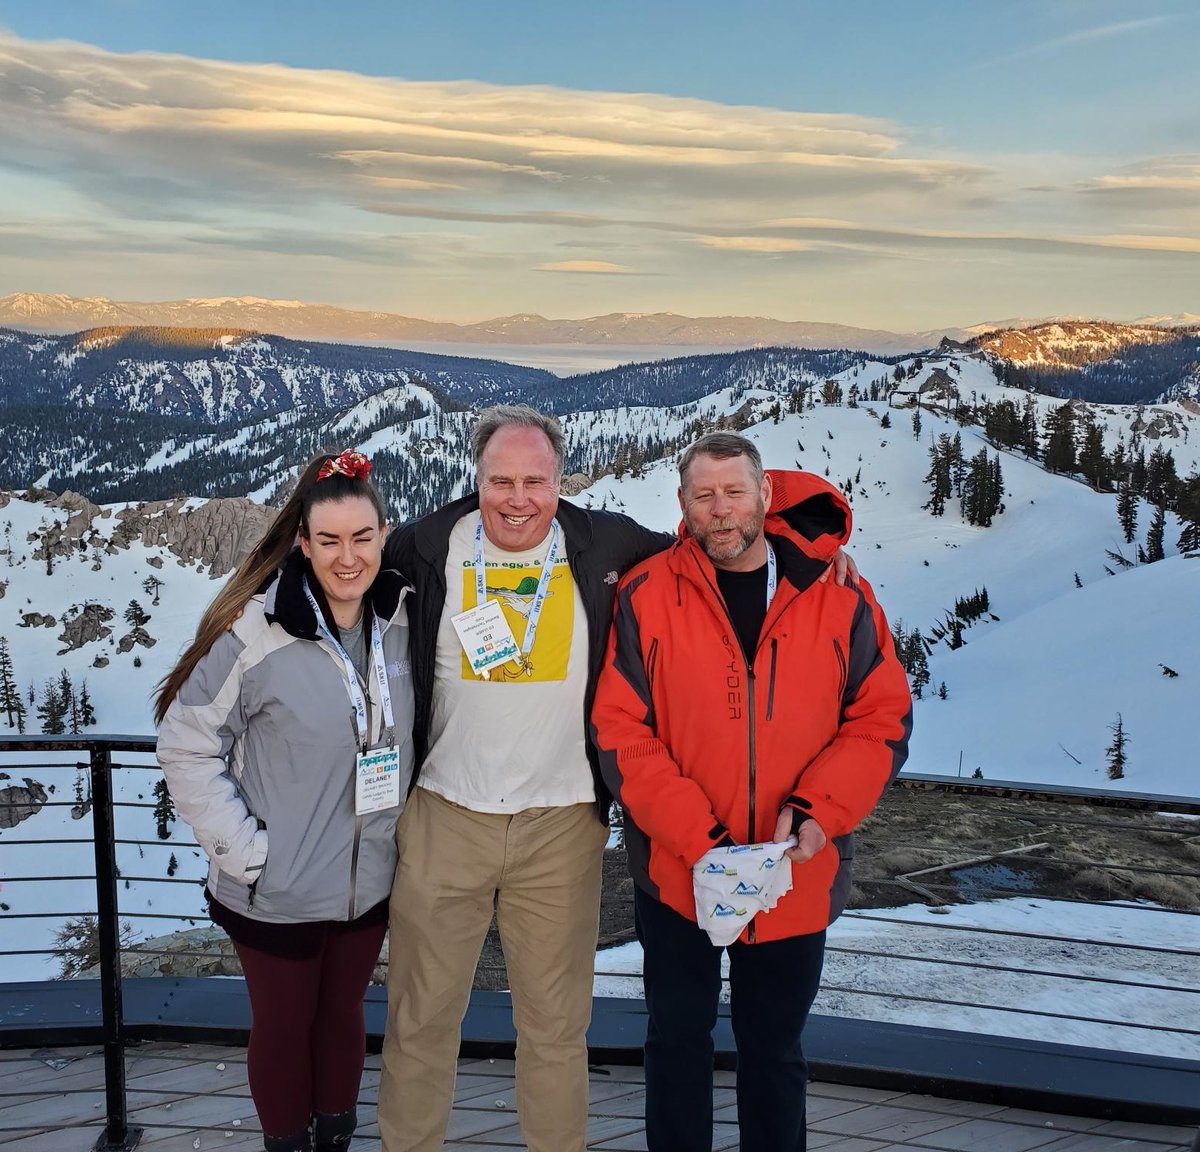 Ed, along with Calvin and Delaney from Bear Country are living it up at the top of Palisades Ski Area in Sun Peaks, enjoying the Mountain Travel Symposium in Lake Tahoe.
#SkiLife #MountainViews #LakeTahoeBeauty 🏔️🌲🌞